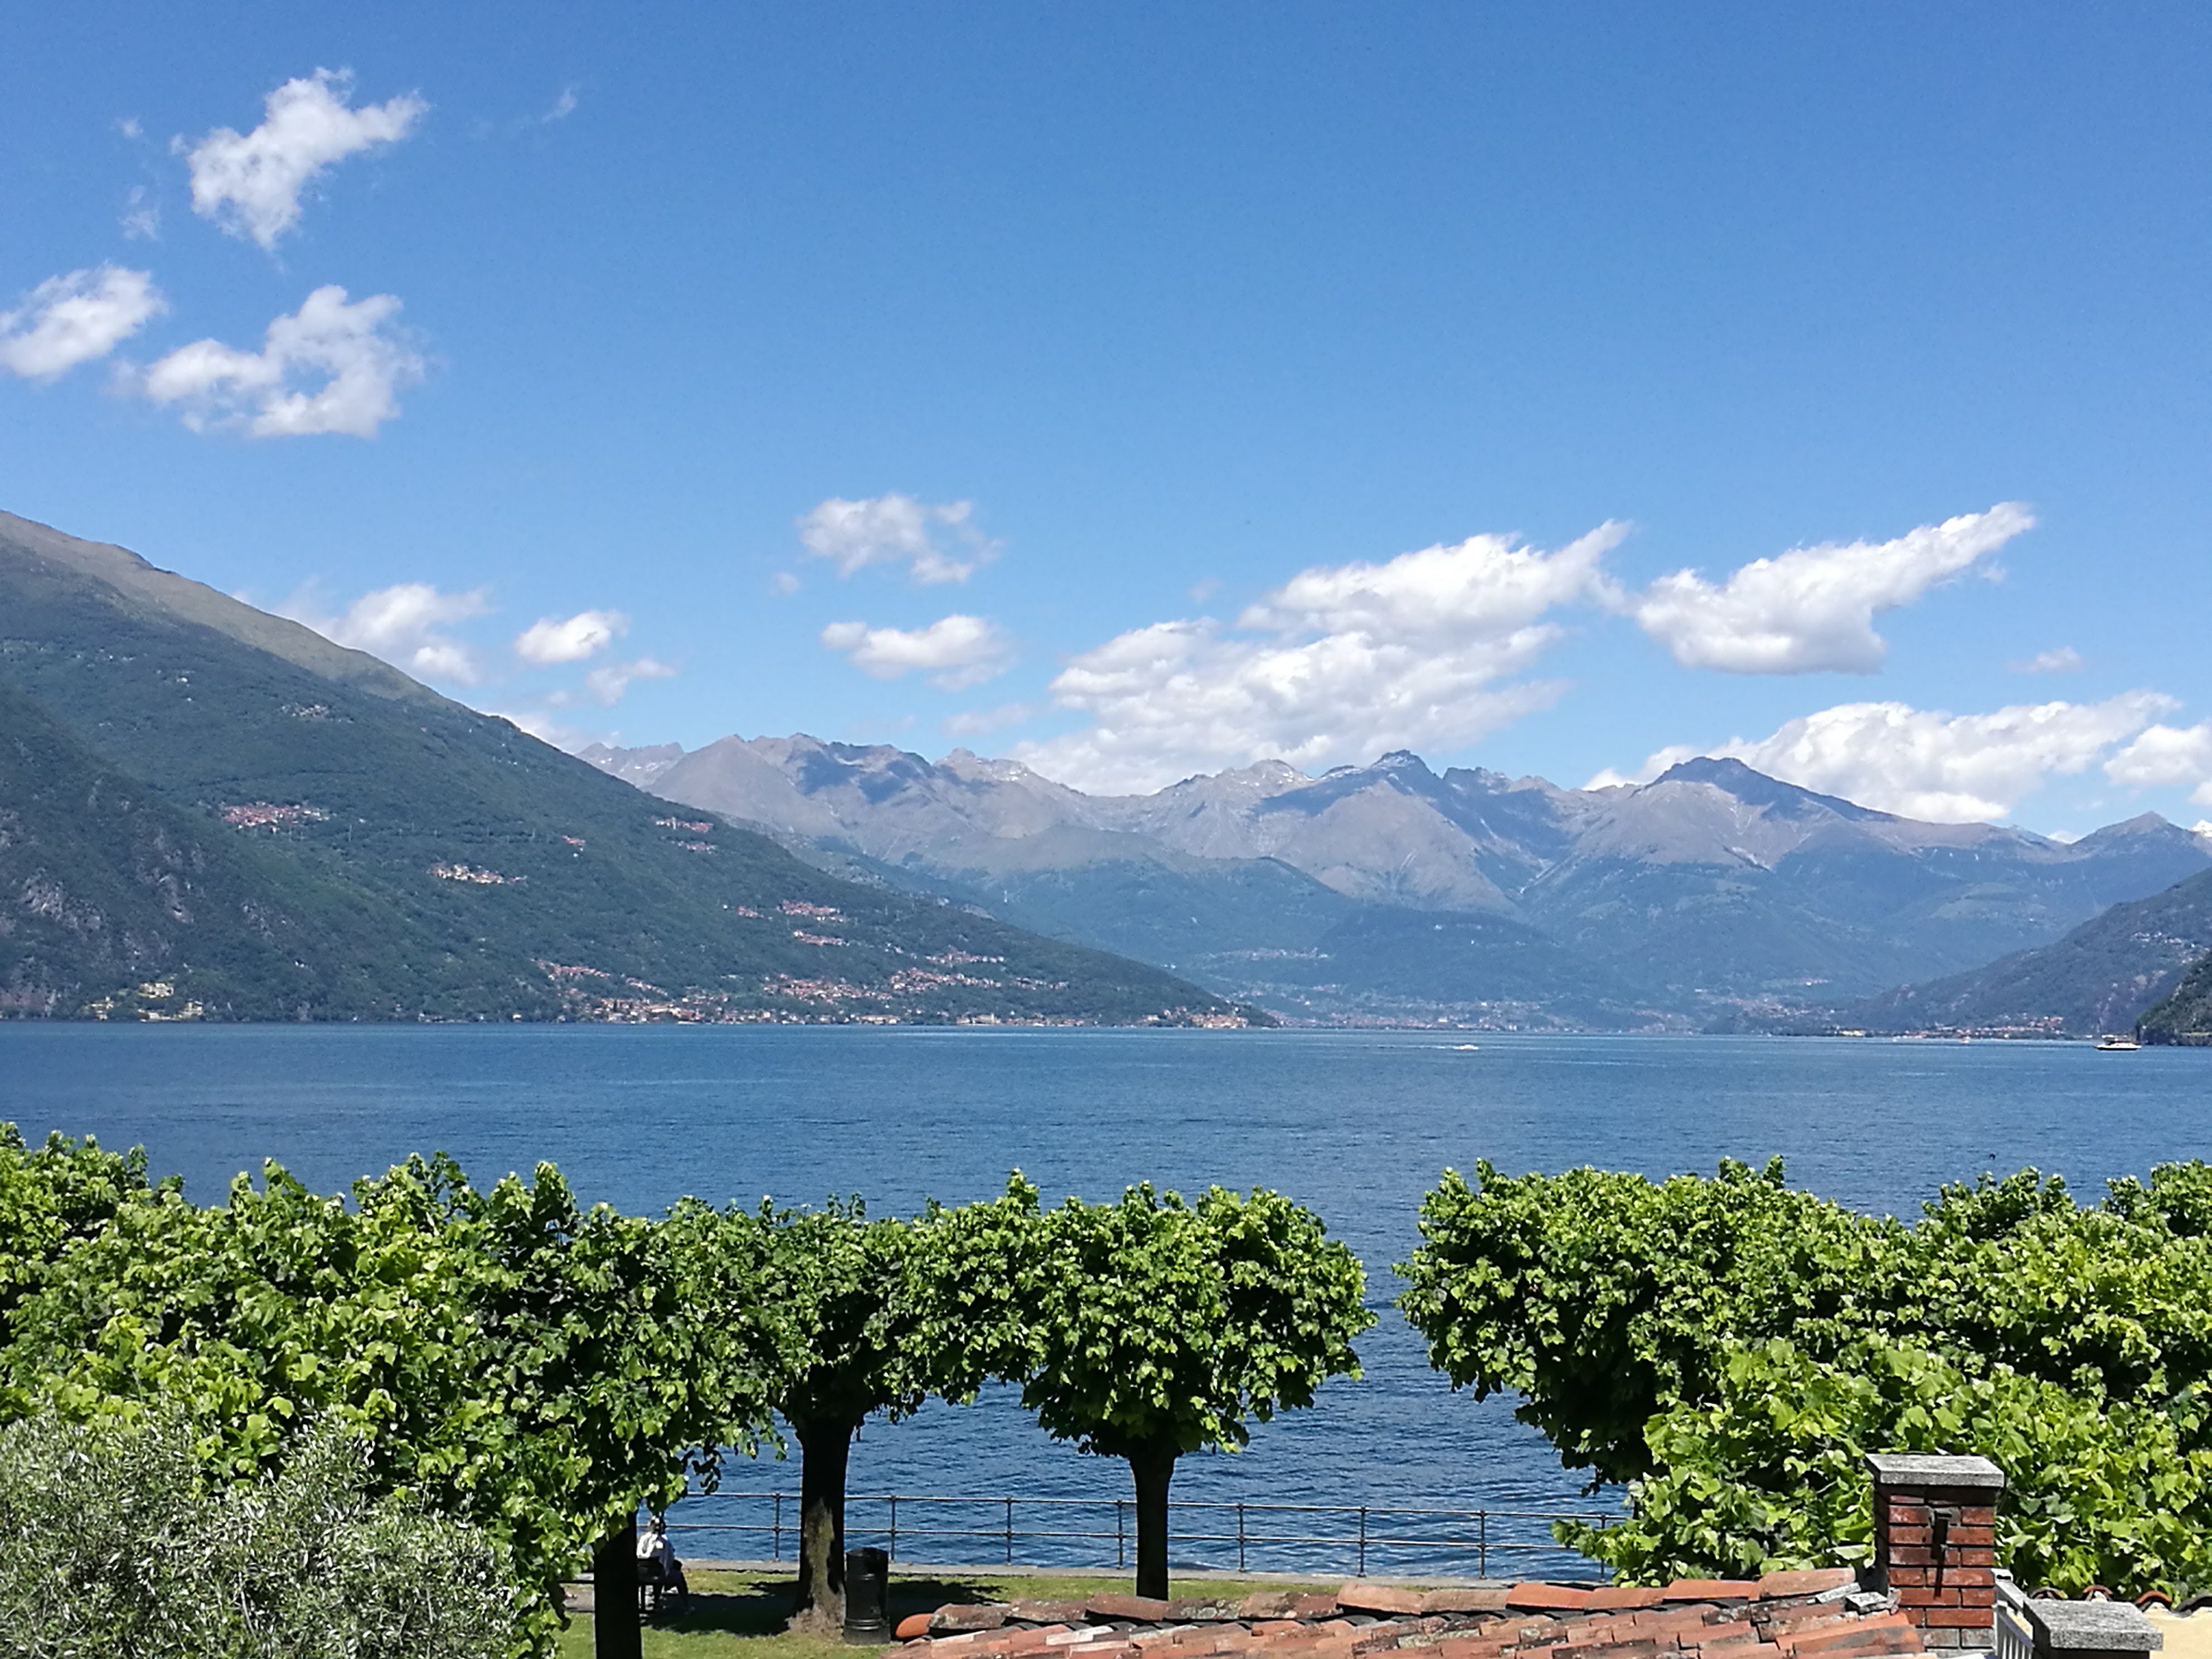 The view of Lake Como from Bellagio